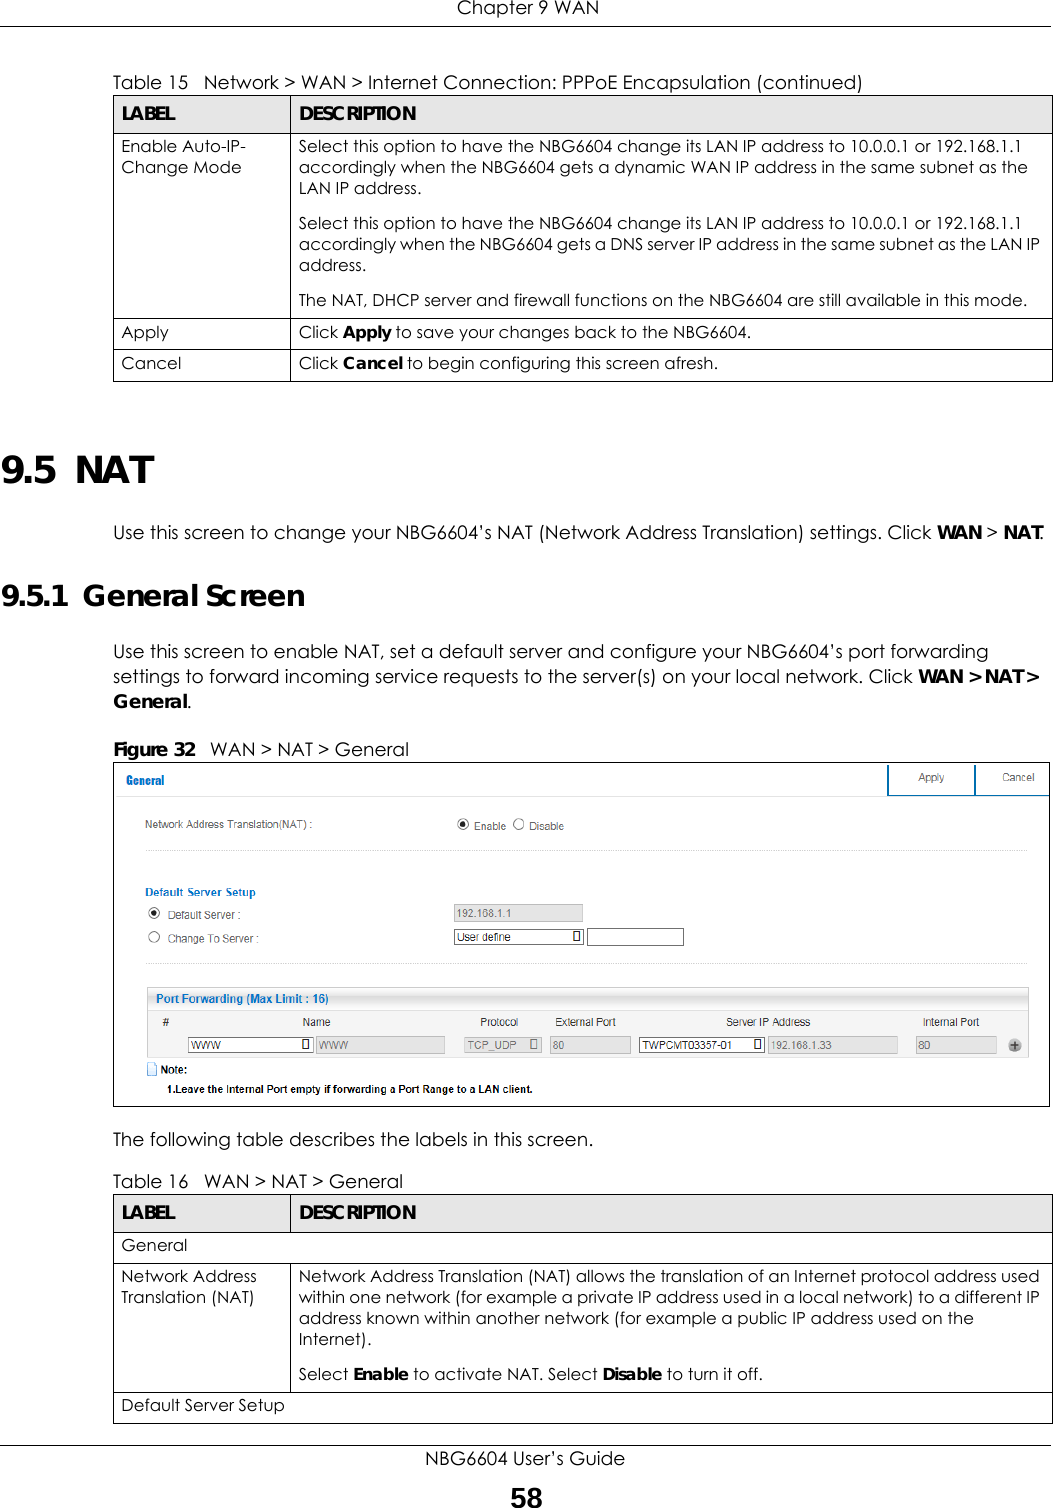  Chapter 9 WANNBG6604 User’s Guide589.5  NATUse this screen to change your NBG6604’s NAT (Network Address Translation) settings. Click WAN &gt; NAT. 9.5.1  General ScreenUse this screen to enable NAT, set a default server and configure your NBG6604’s port forwarding settings to forward incoming service requests to the server(s) on your local network. Click WAN &gt; NAT &gt; General.Figure 32   WAN &gt; NAT &gt; General The following table describes the labels in this screen.Enable Auto-IP-Change ModeSelect this option to have the NBG6604 change its LAN IP address to 10.0.0.1 or 192.168.1.1 accordingly when the NBG6604 gets a dynamic WAN IP address in the same subnet as the LAN IP address.Select this option to have the NBG6604 change its LAN IP address to 10.0.0.1 or 192.168.1.1 accordingly when the NBG6604 gets a DNS server IP address in the same subnet as the LAN IP address.The NAT, DHCP server and firewall functions on the NBG6604 are still available in this mode.Apply Click Apply to save your changes back to the NBG6604.Cancel Click Cancel to begin configuring this screen afresh.Table 15   Network &gt; WAN &gt; Internet Connection: PPPoE Encapsulation (continued)LABEL DESCRIPTIONTable 16   WAN &gt; NAT &gt; General LABEL DESCRIPTIONGeneralNetwork Address Translation (NAT)Network Address Translation (NAT) allows the translation of an Internet protocol address used within one network (for example a private IP address used in a local network) to a different IP address known within another network (for example a public IP address used on the Internet). Select Enable to activate NAT. Select Disable to turn it off.Default Server Setup